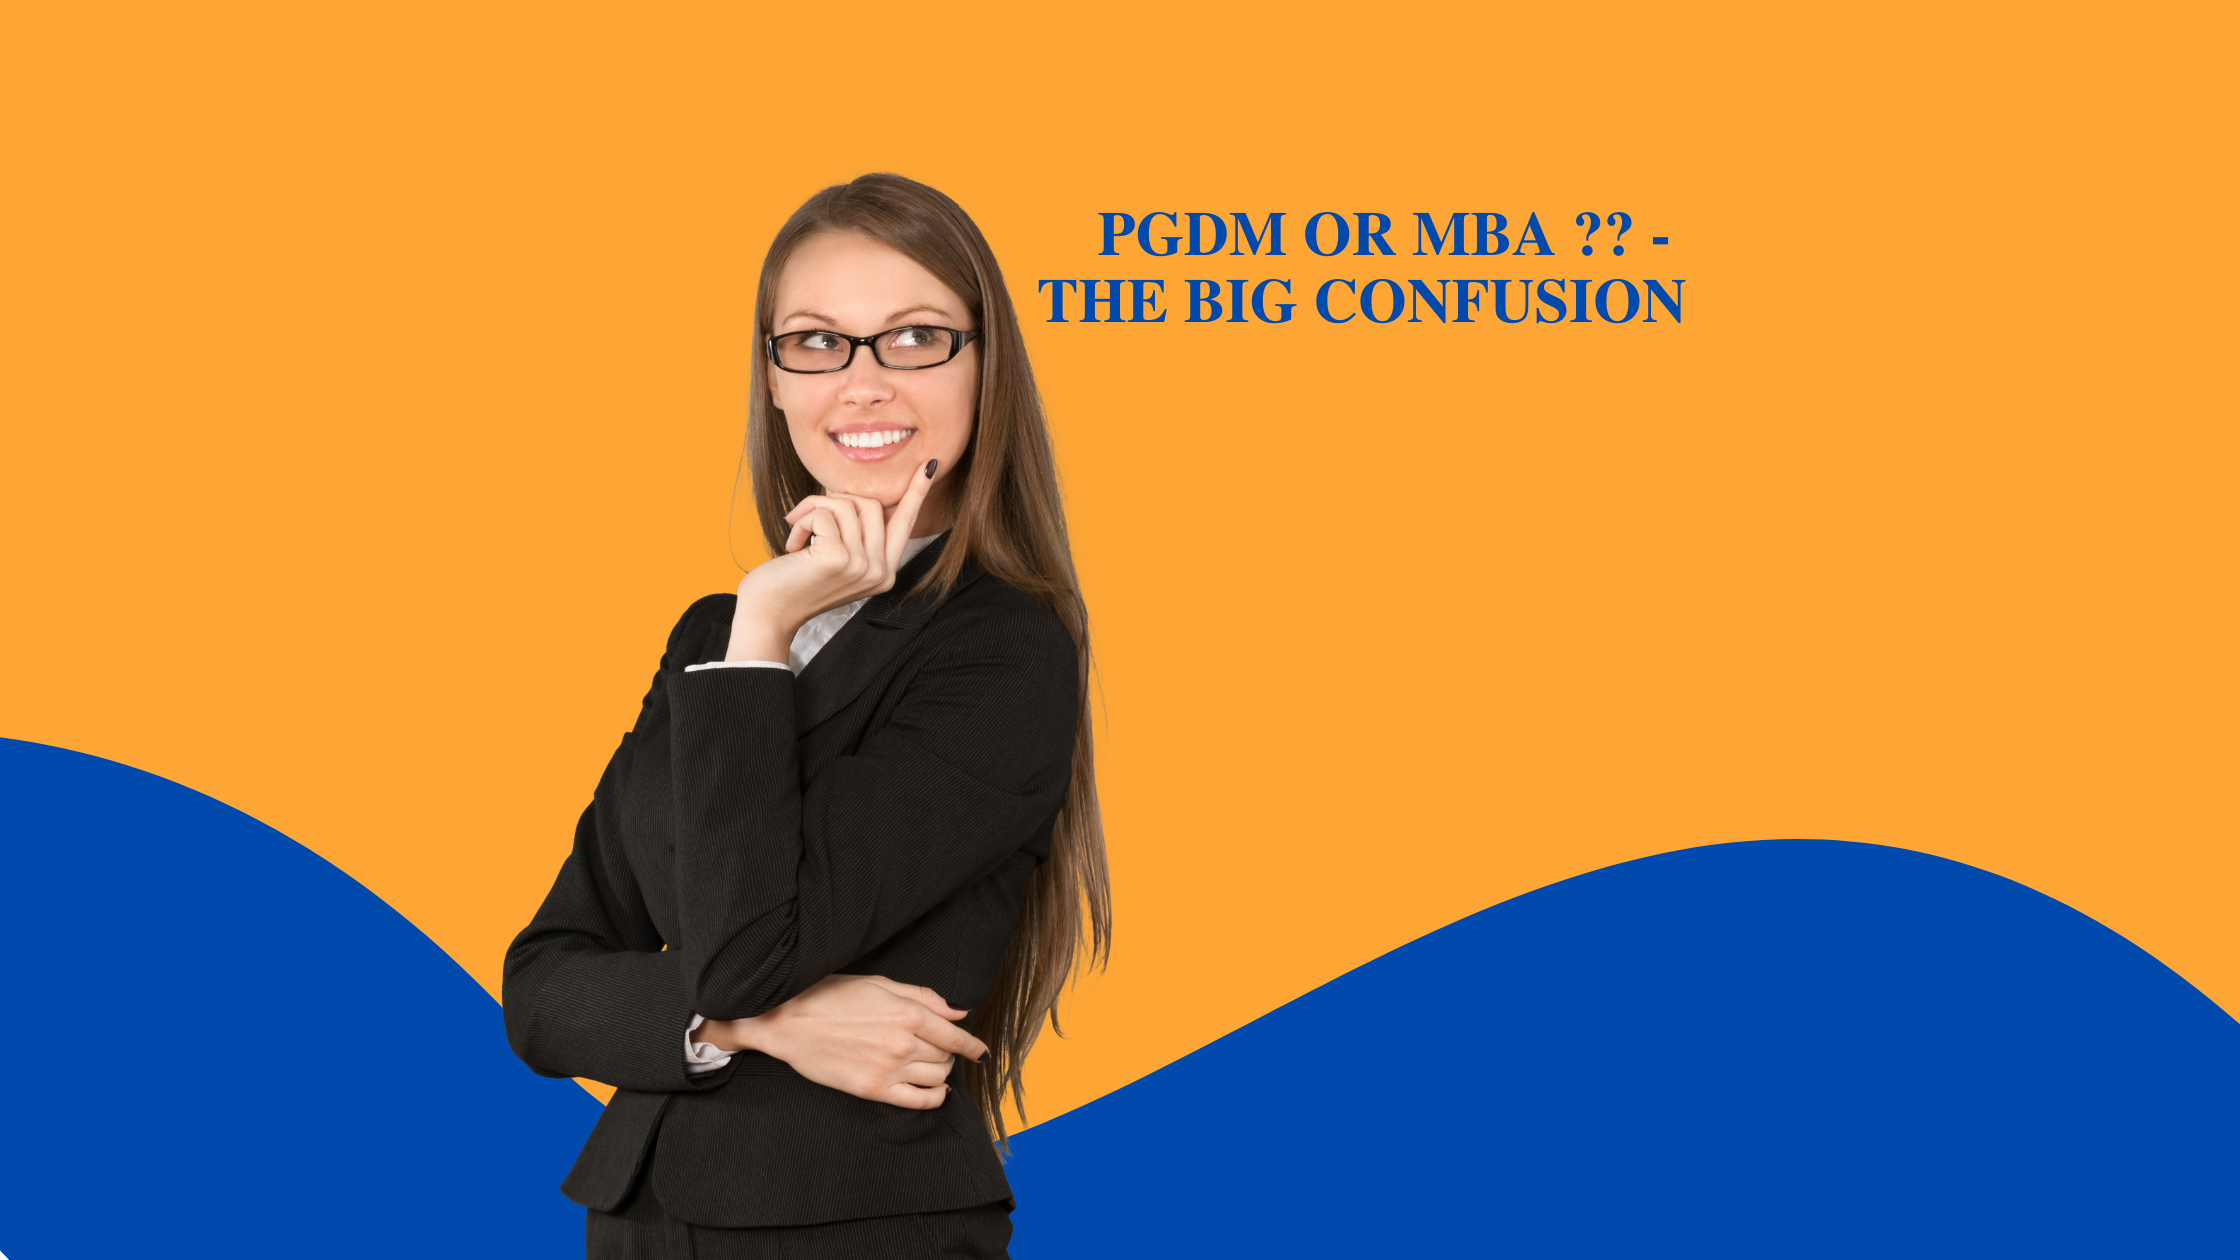 PGDM or MBA ?? - The Big Confusion